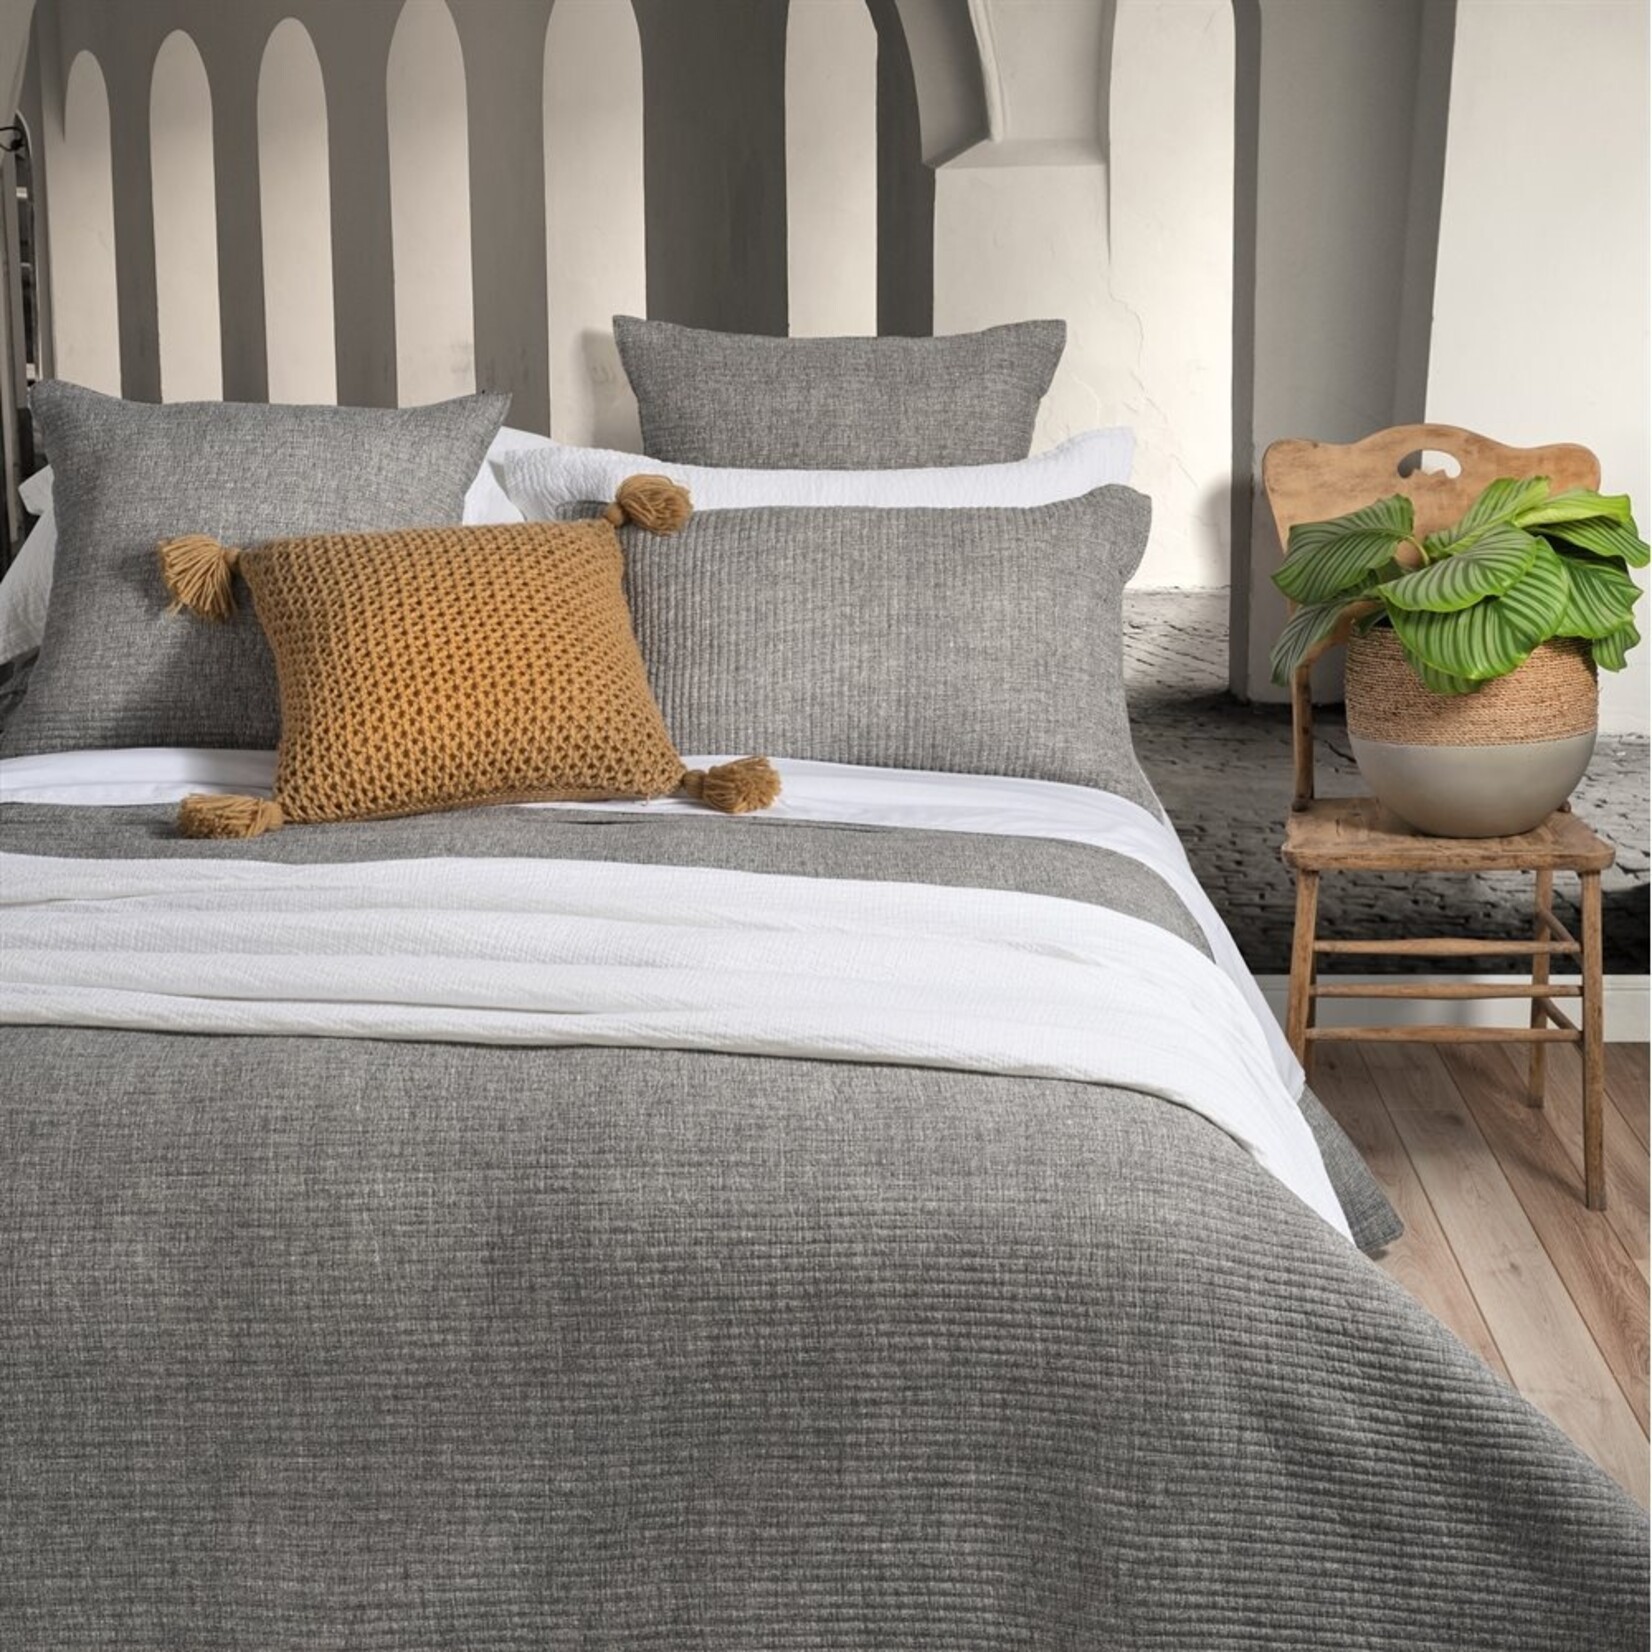 Home Chambray Grey Coverlet -